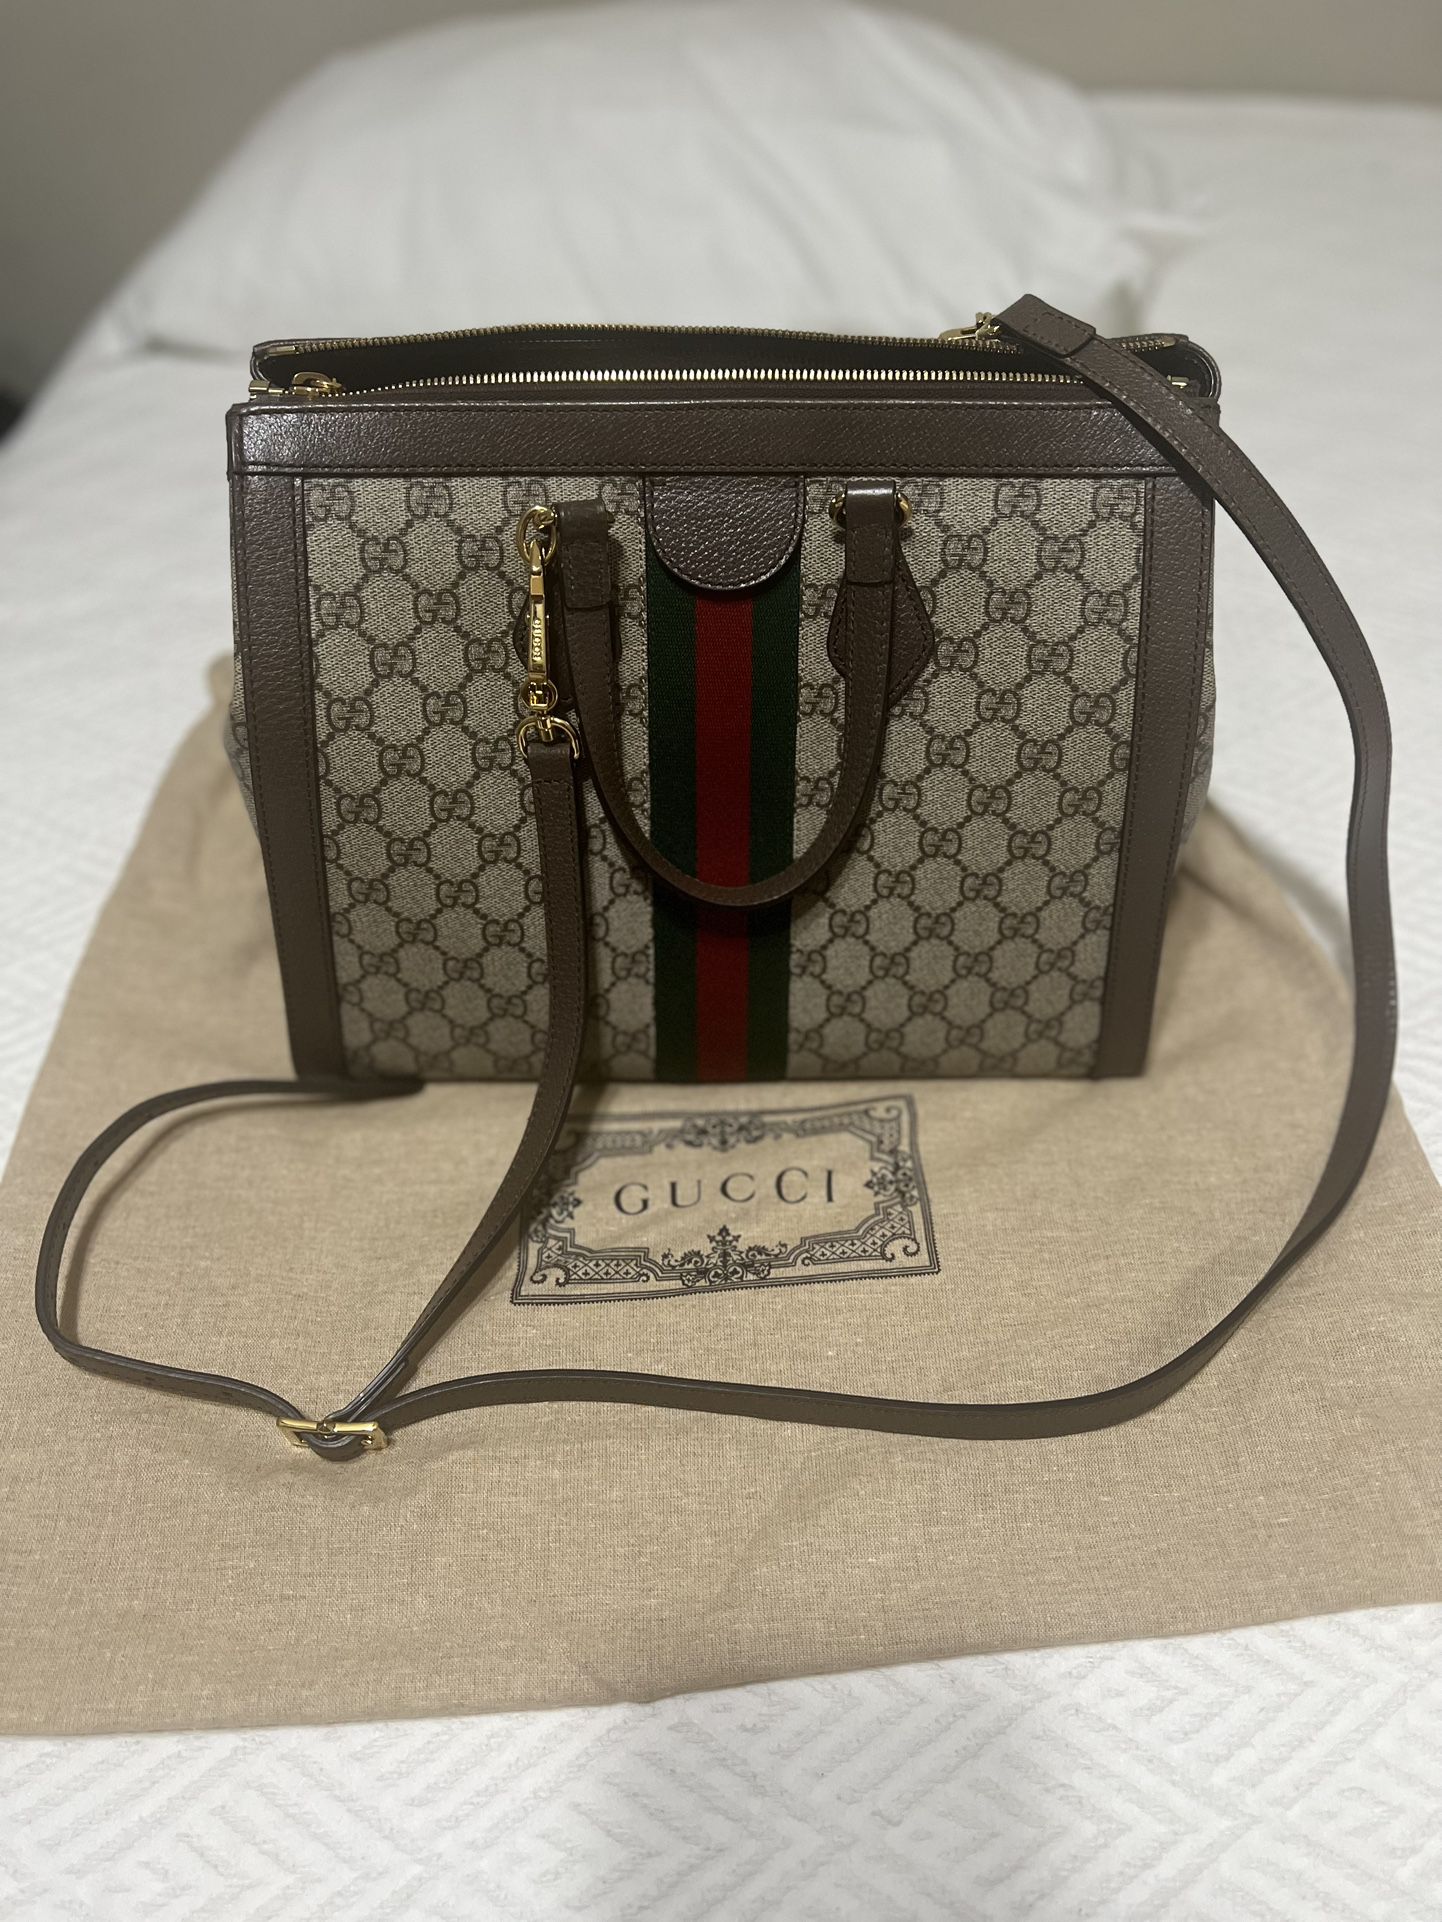 Gucci Ophidia Medium Tote Bag for Sale in Queens, NY - OfferUp